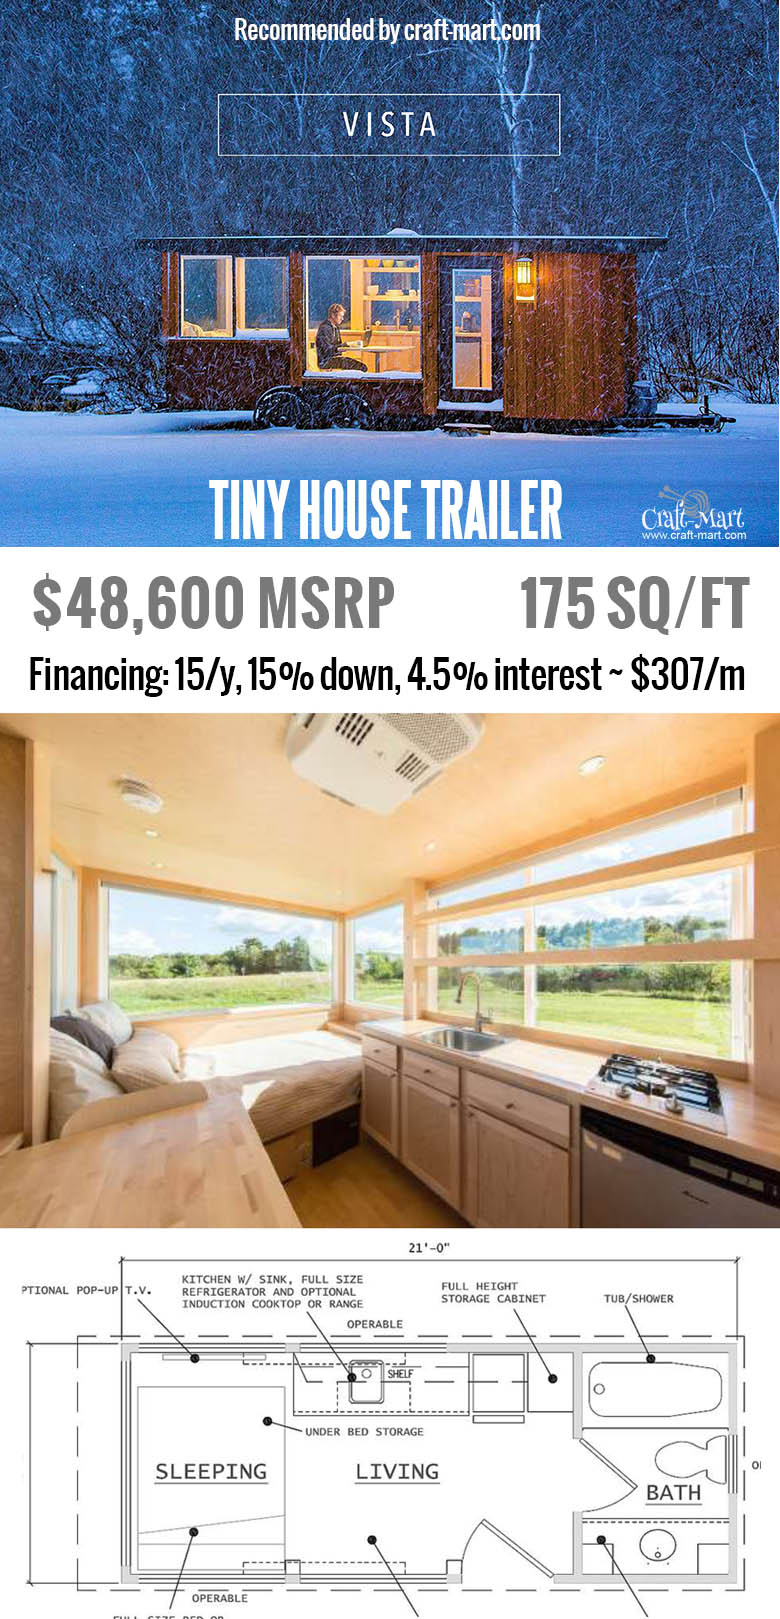 Vista is perfect for a guest house Do you have a place to put one of these tiny houses? Get one of these for FREE and start earning money from renting it! Or simply buy one of the most beautiful tiny house trailers with easy financing starting from $195/m! #tinyhouse #tinyhouseplans #minimalism